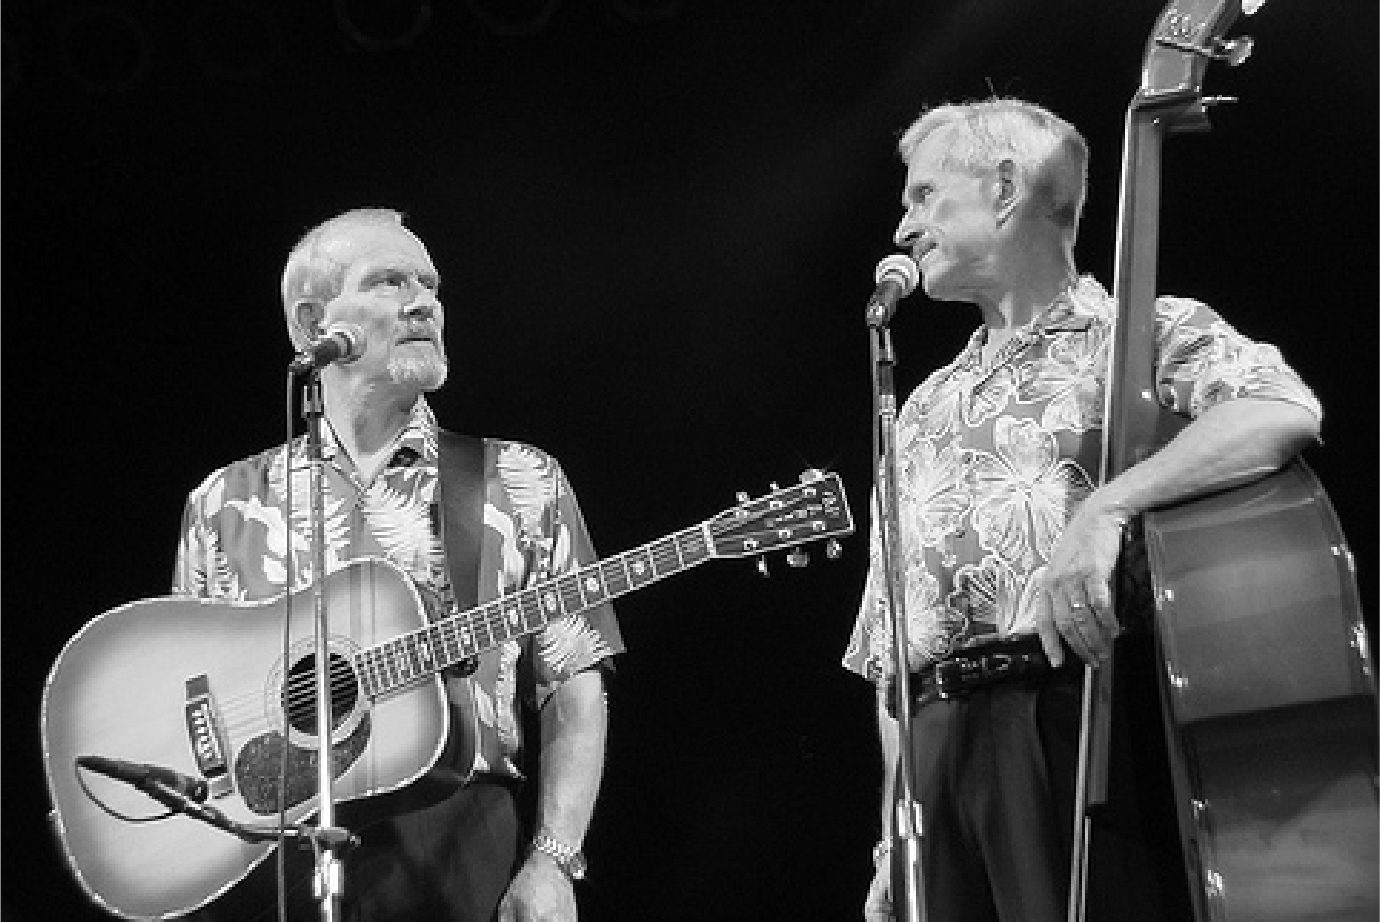 The Smothers Brothers on stage.